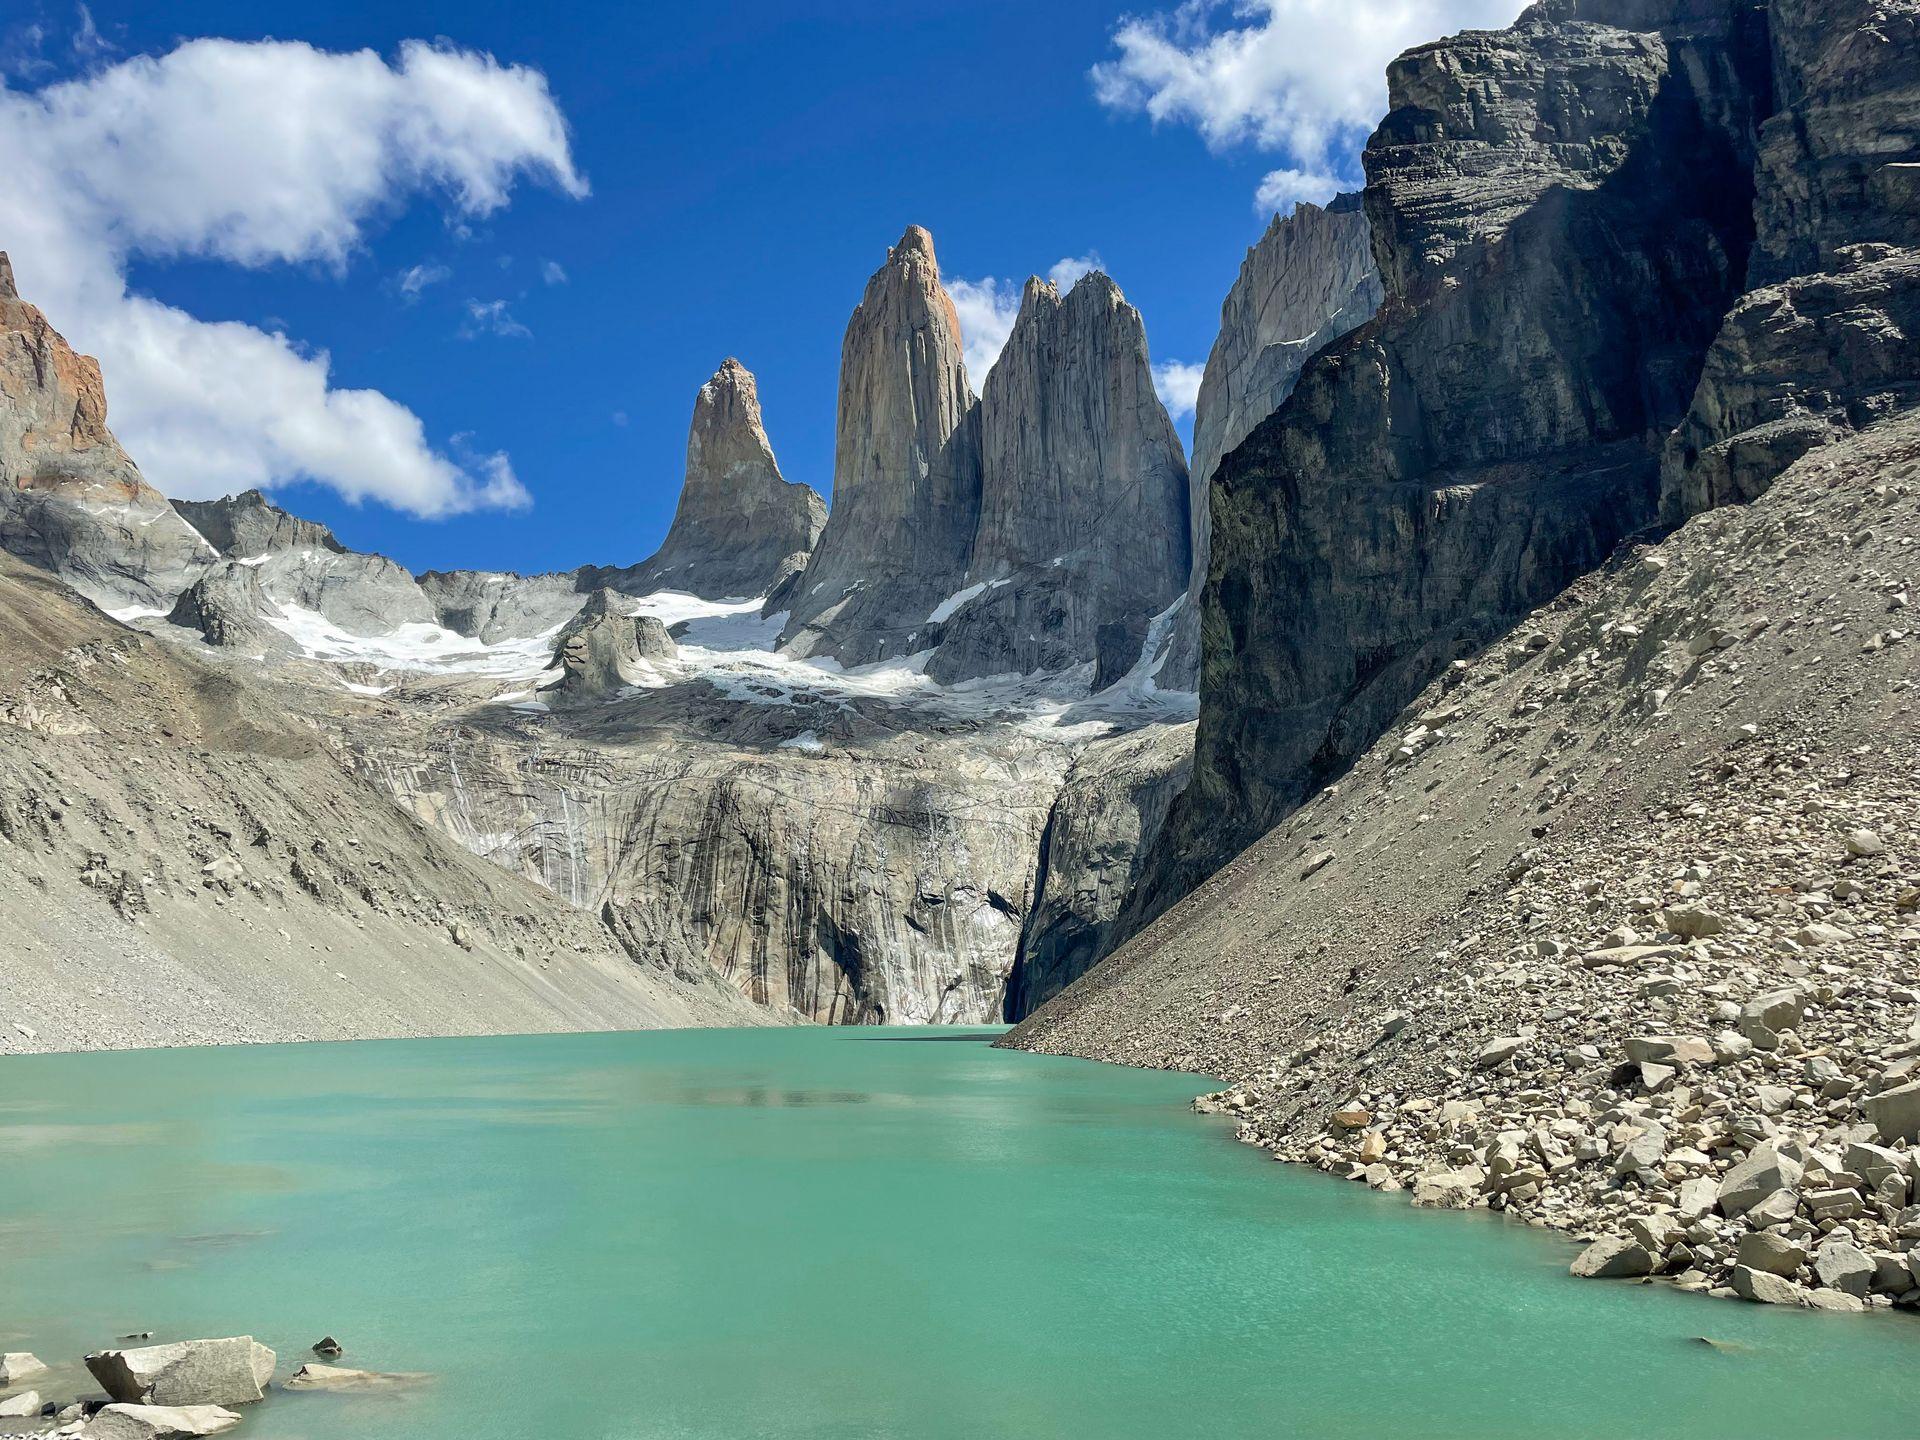 A view of Mirador Las Torres on the W Trek in Patagonia. The view features 3 giant pillars of rock towering in the area with a lake in the foreground.